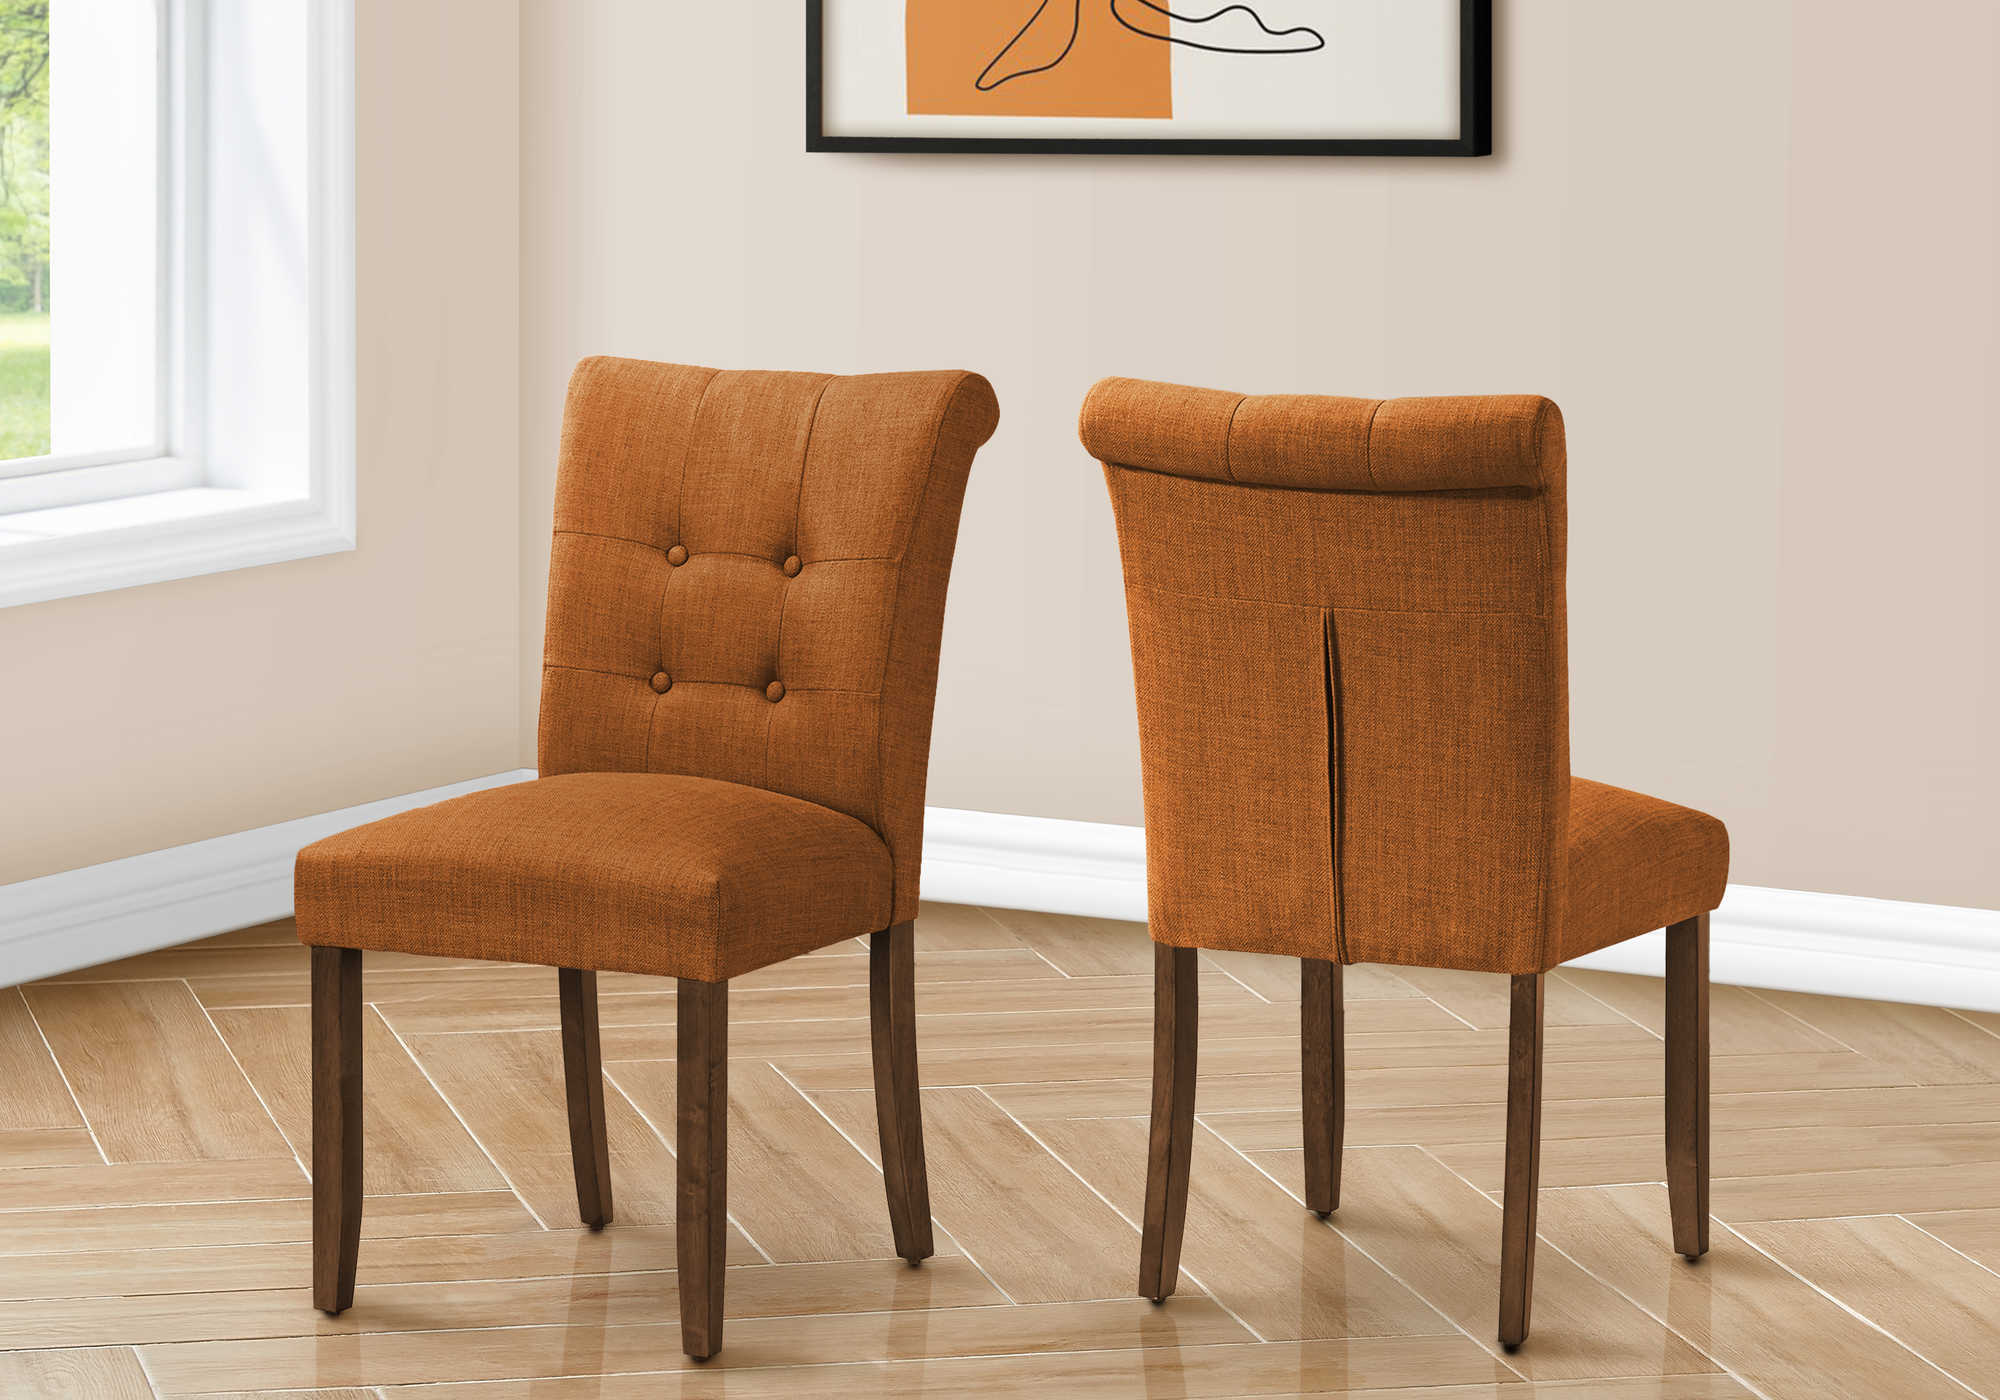 DINING CHAIR - 2PCS / 38"H UPHOLSTERED ORANGE FABRIC